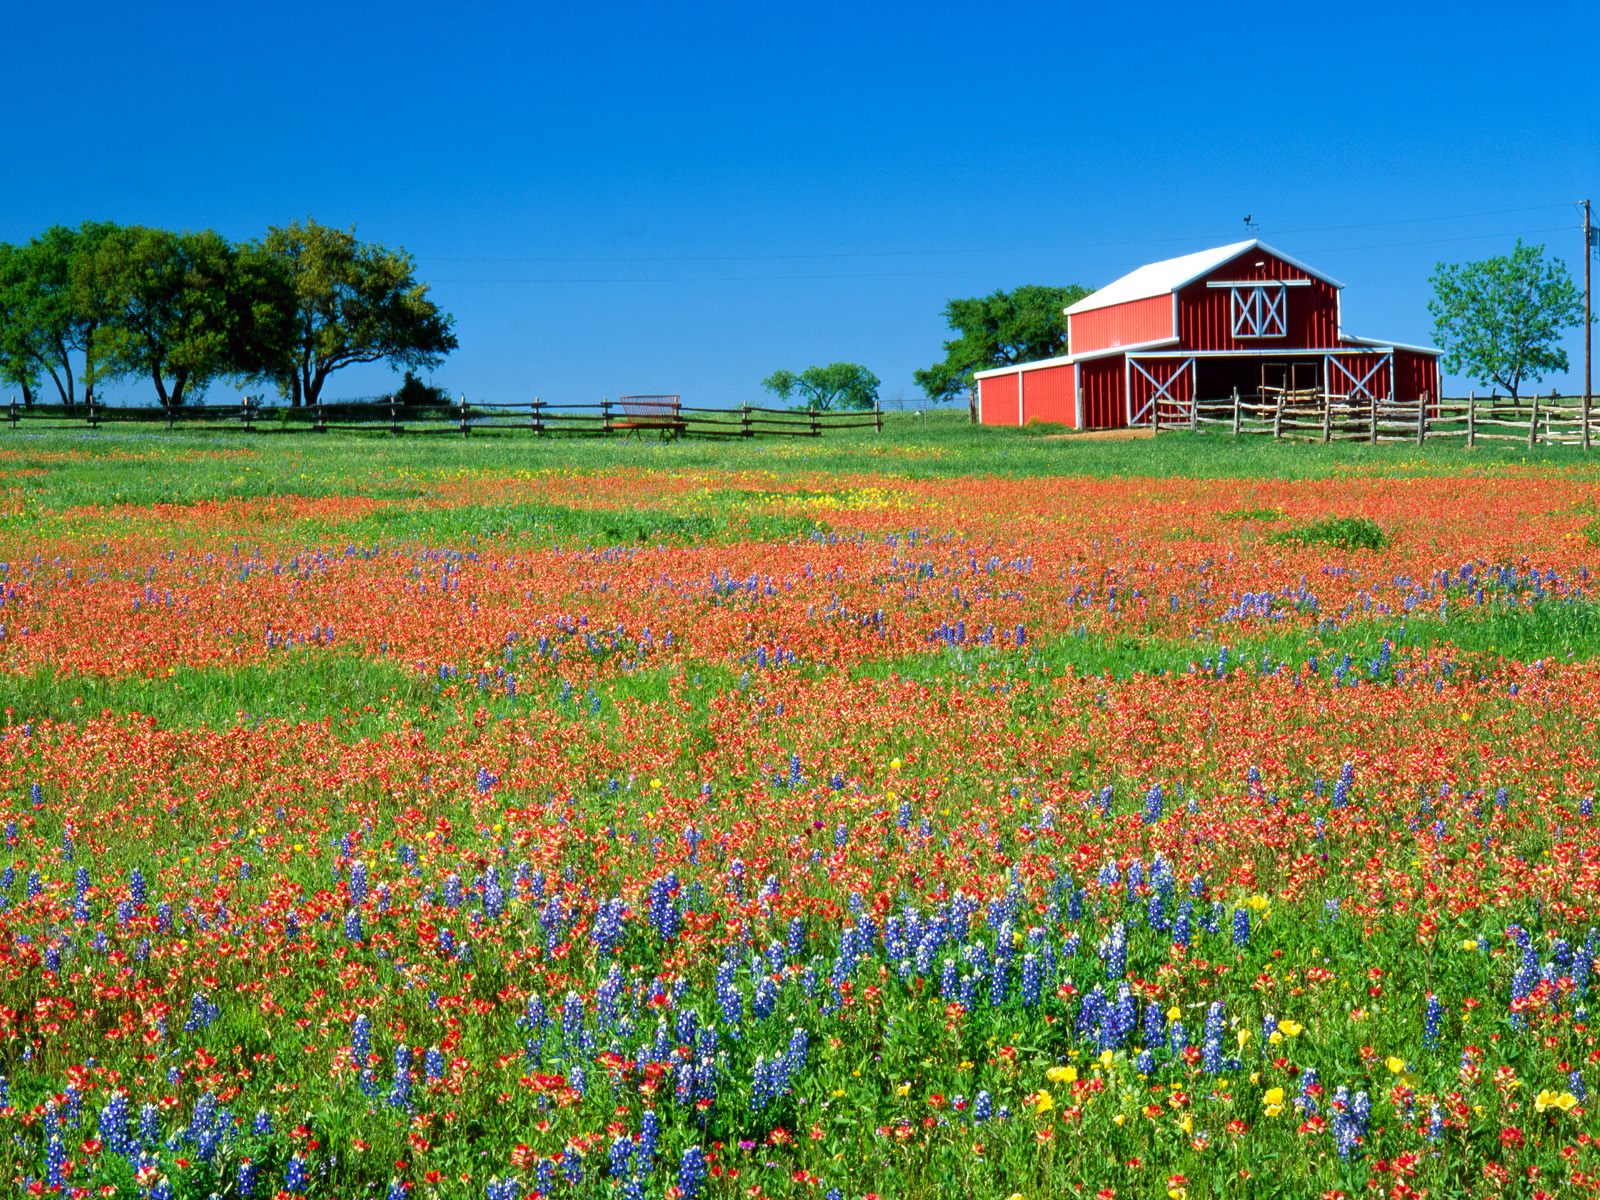 Texas Desktop Wallpaper   HD Wallpapers Backgrounds of Your Choice